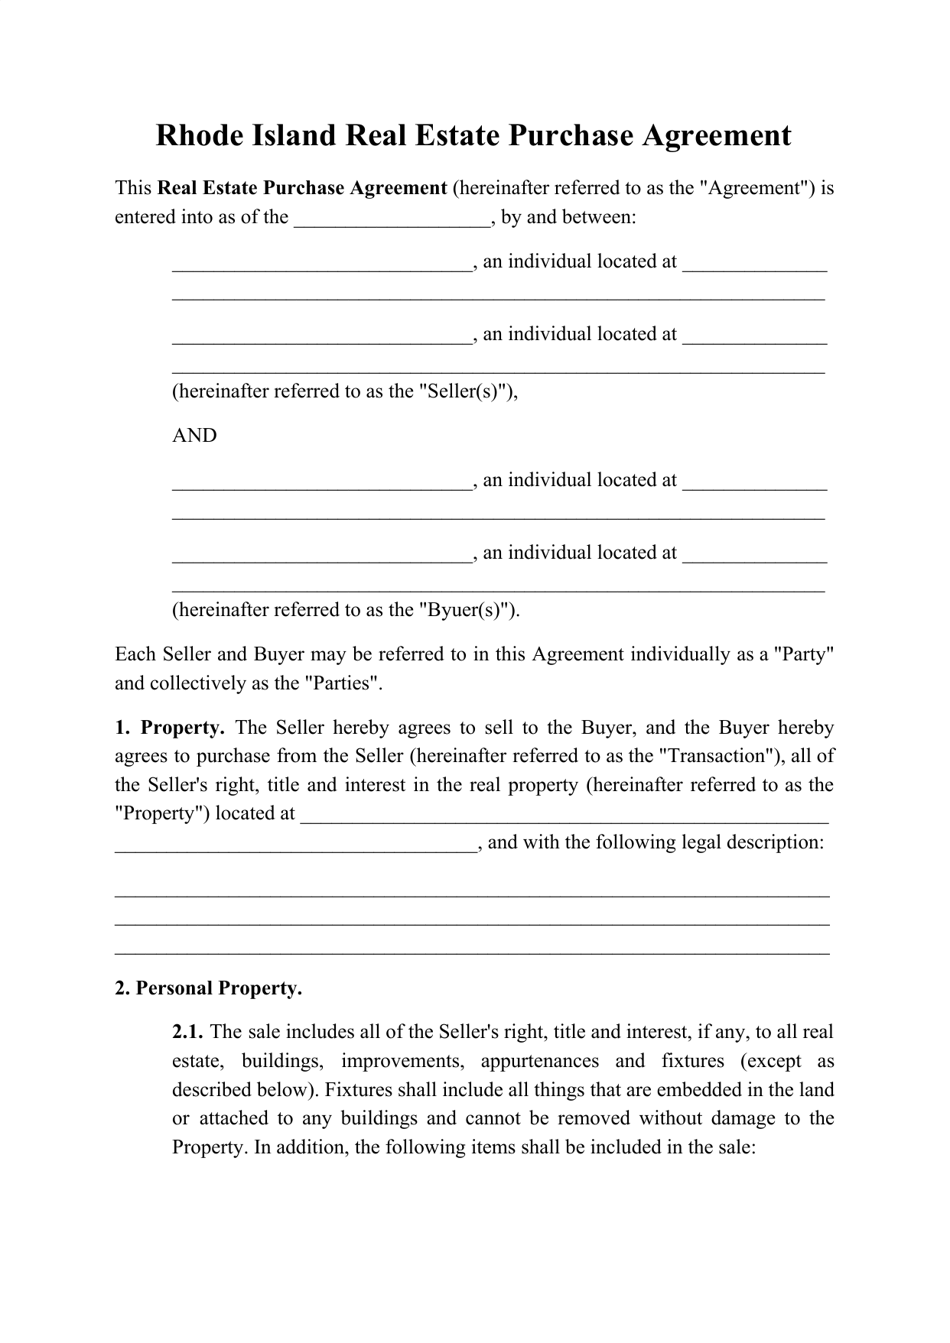 Real Estate Purchase Agreement Template - Rhode Island, Page 1